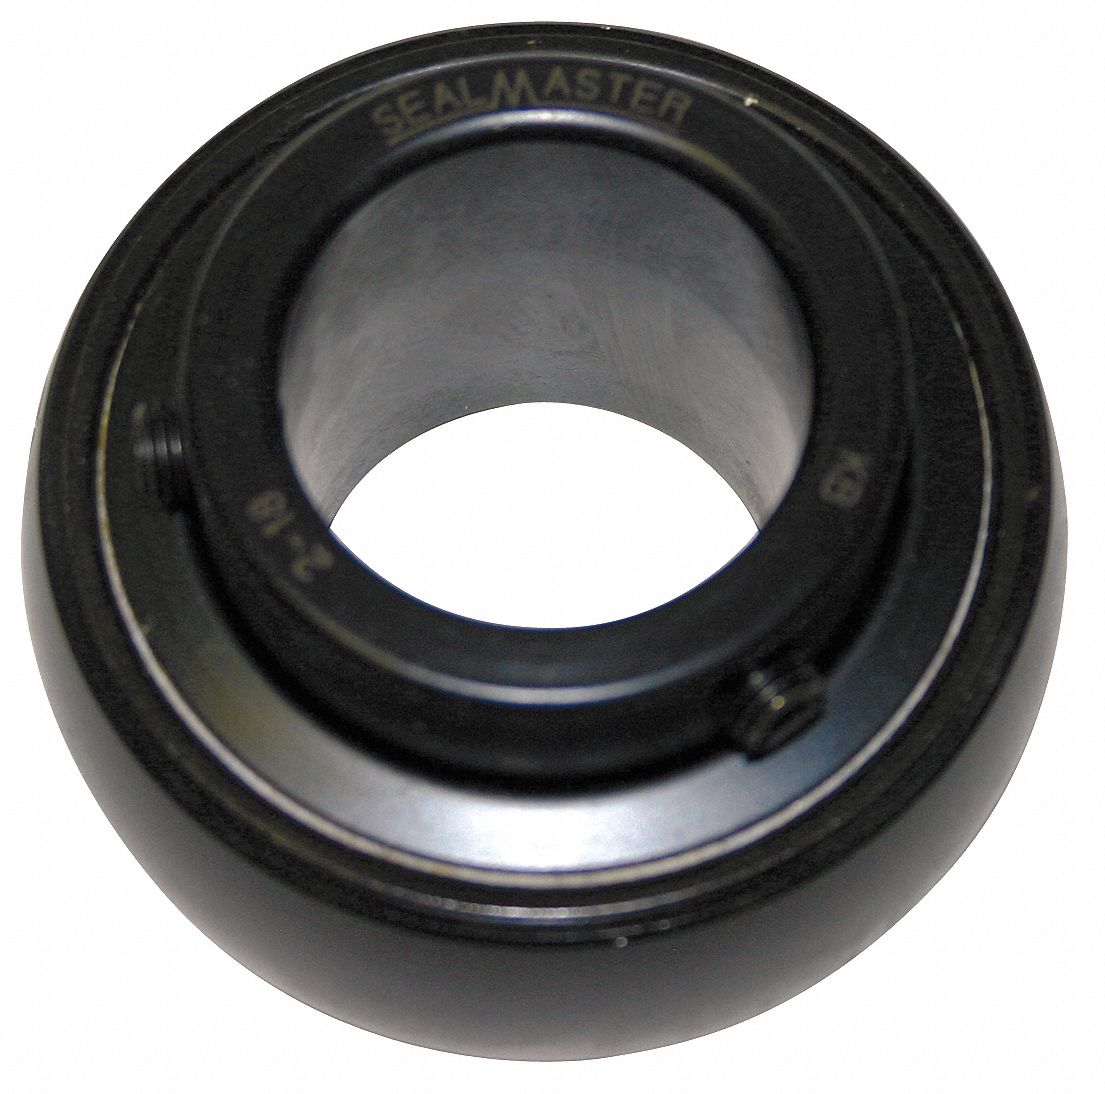 NMB DDL-740 Minebea ID4-OD7-W2mm open Stainless steel bearing SMR74